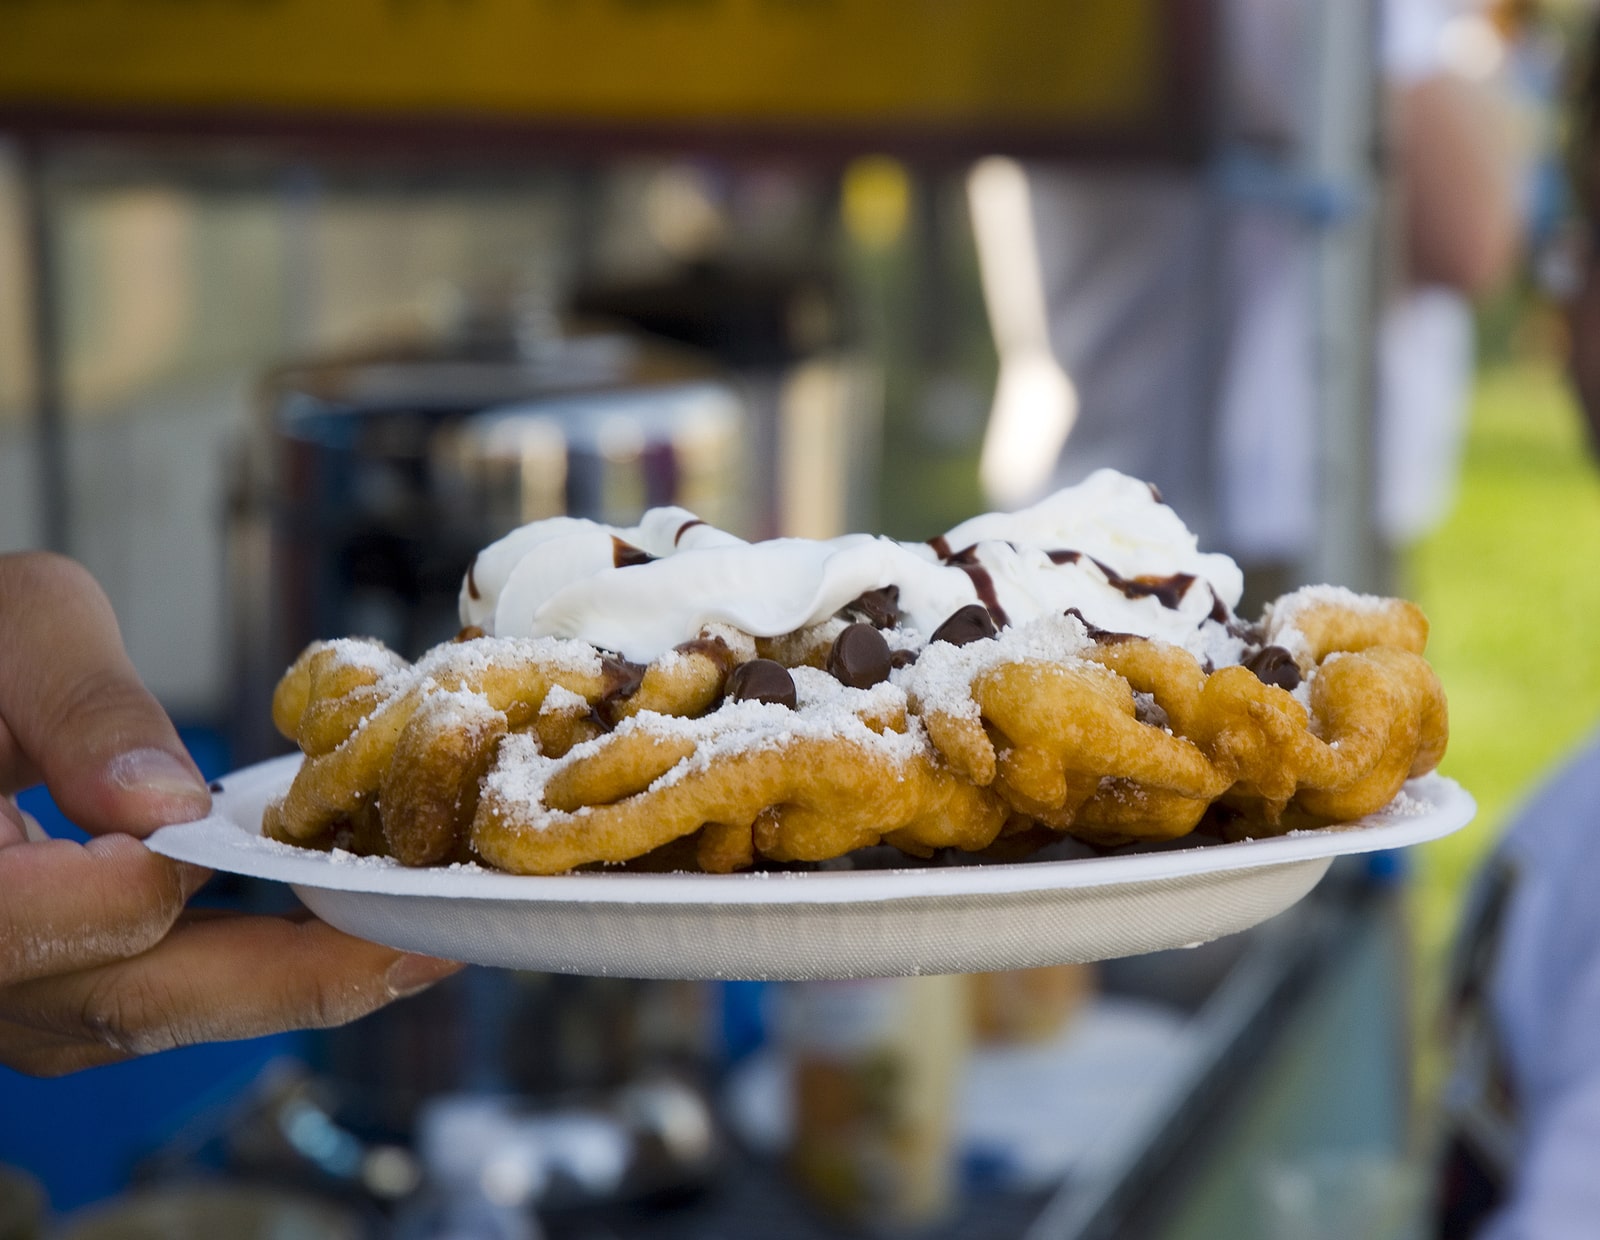 Funnel cake with whipped cream and chocolate on a plate.